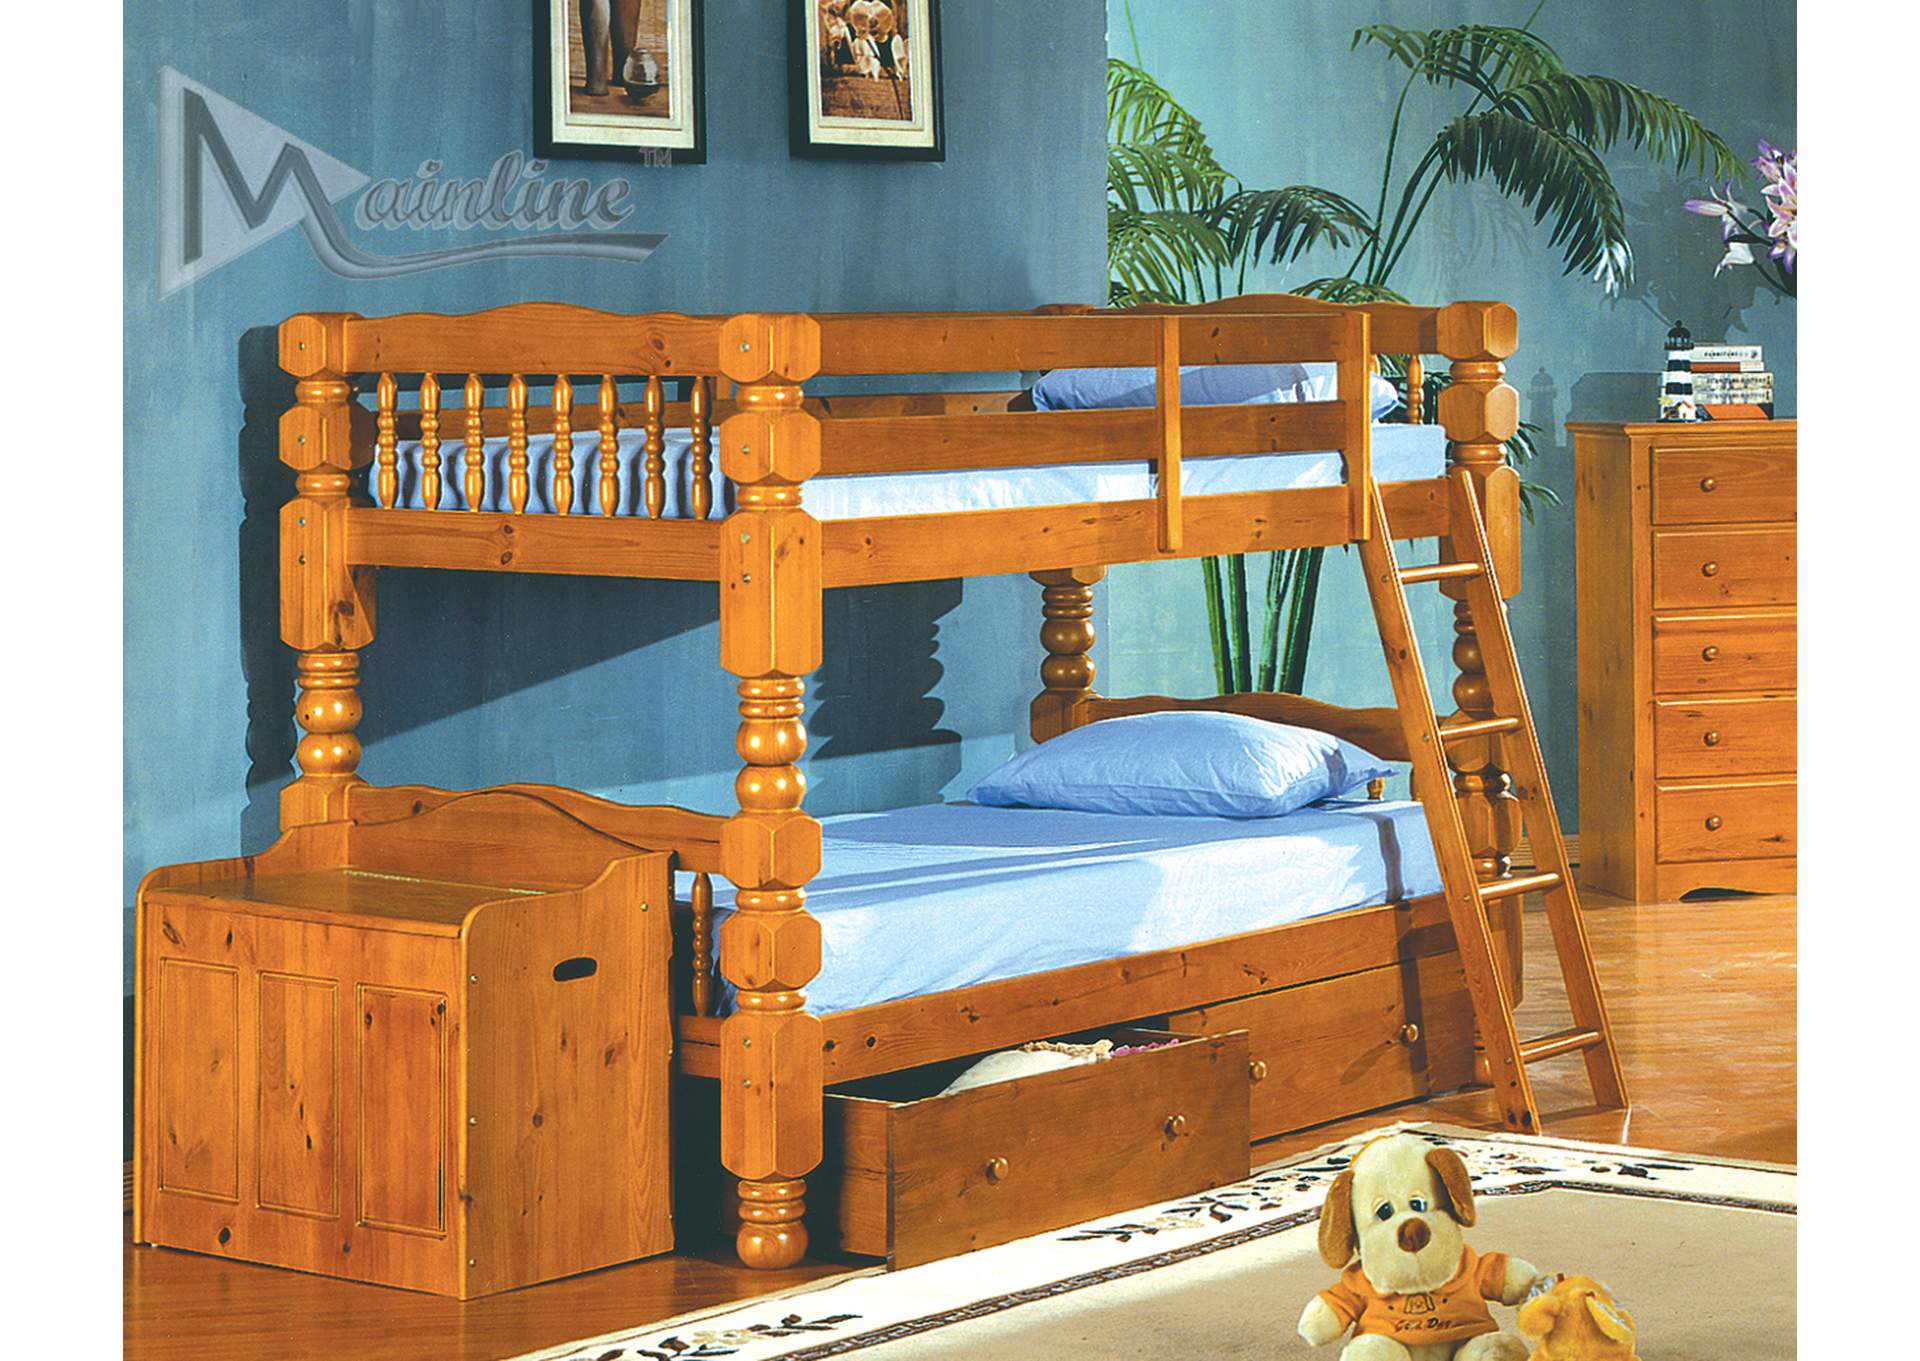 Pine T/T Xl Spindle Bunk Bed,Mainline